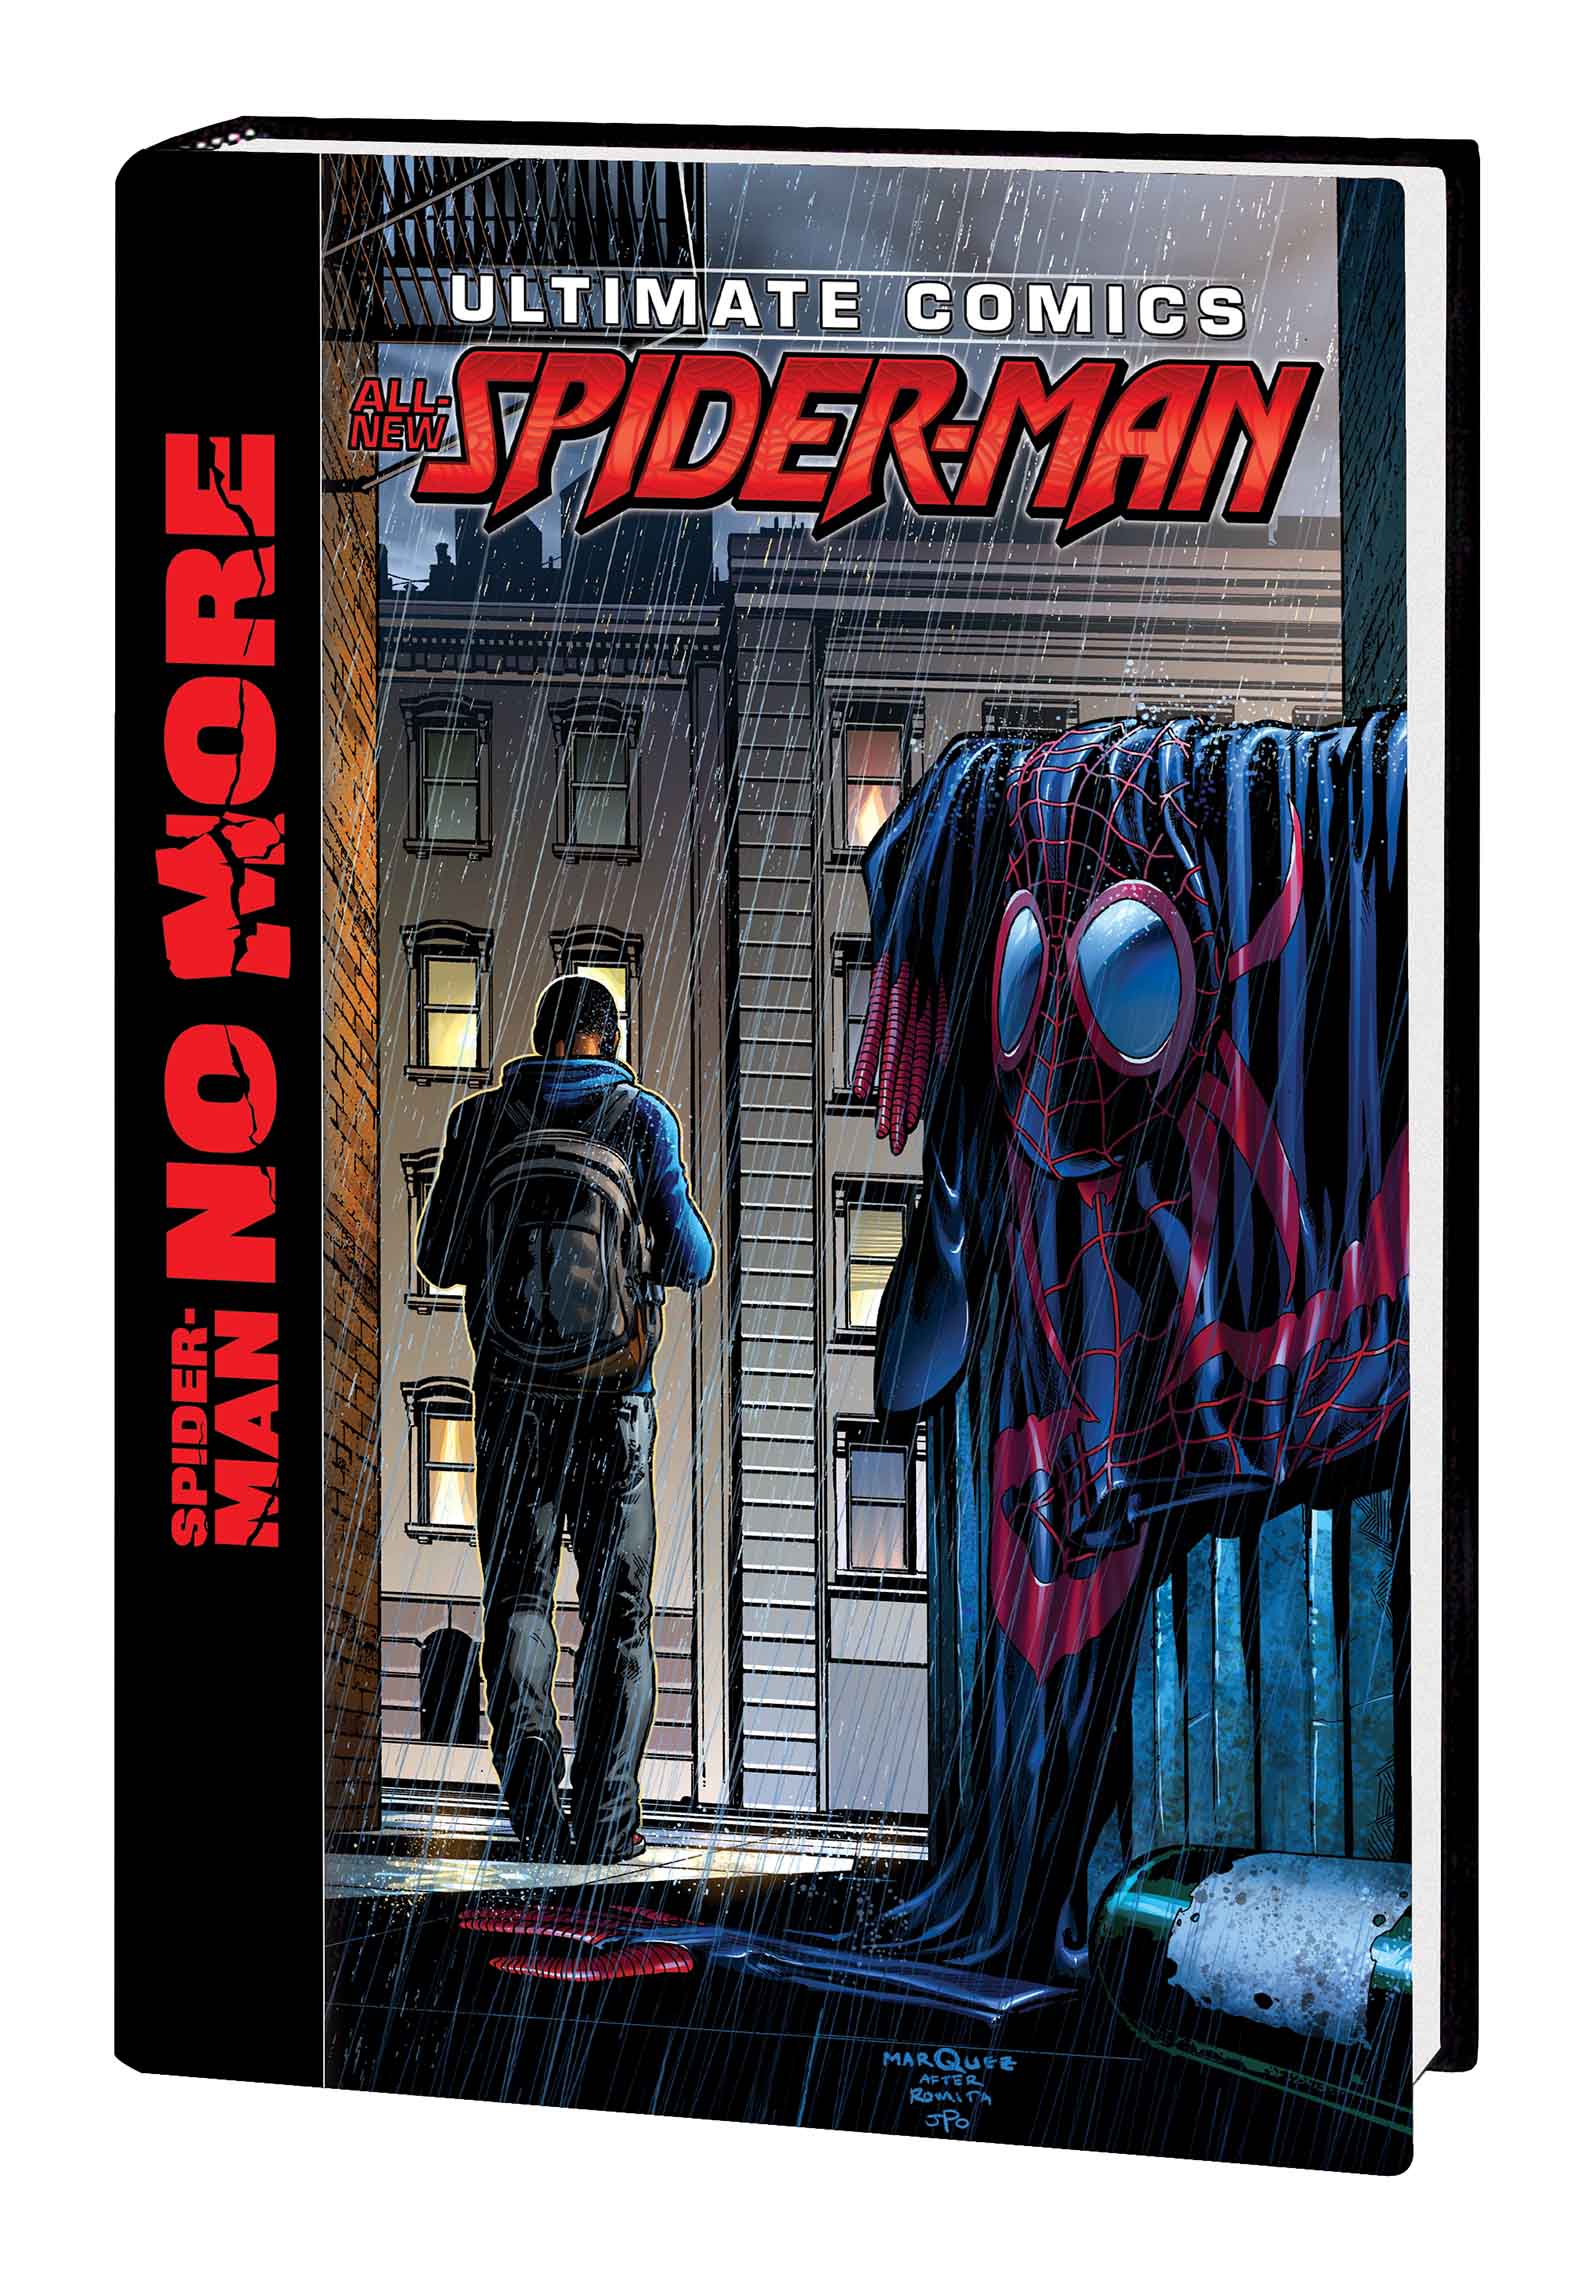 Ultimate Comics Spider-Man by Brian Michael Bendis Vol. 5 (Hardcover) |  Comic Issues | Comic Books | Marvel